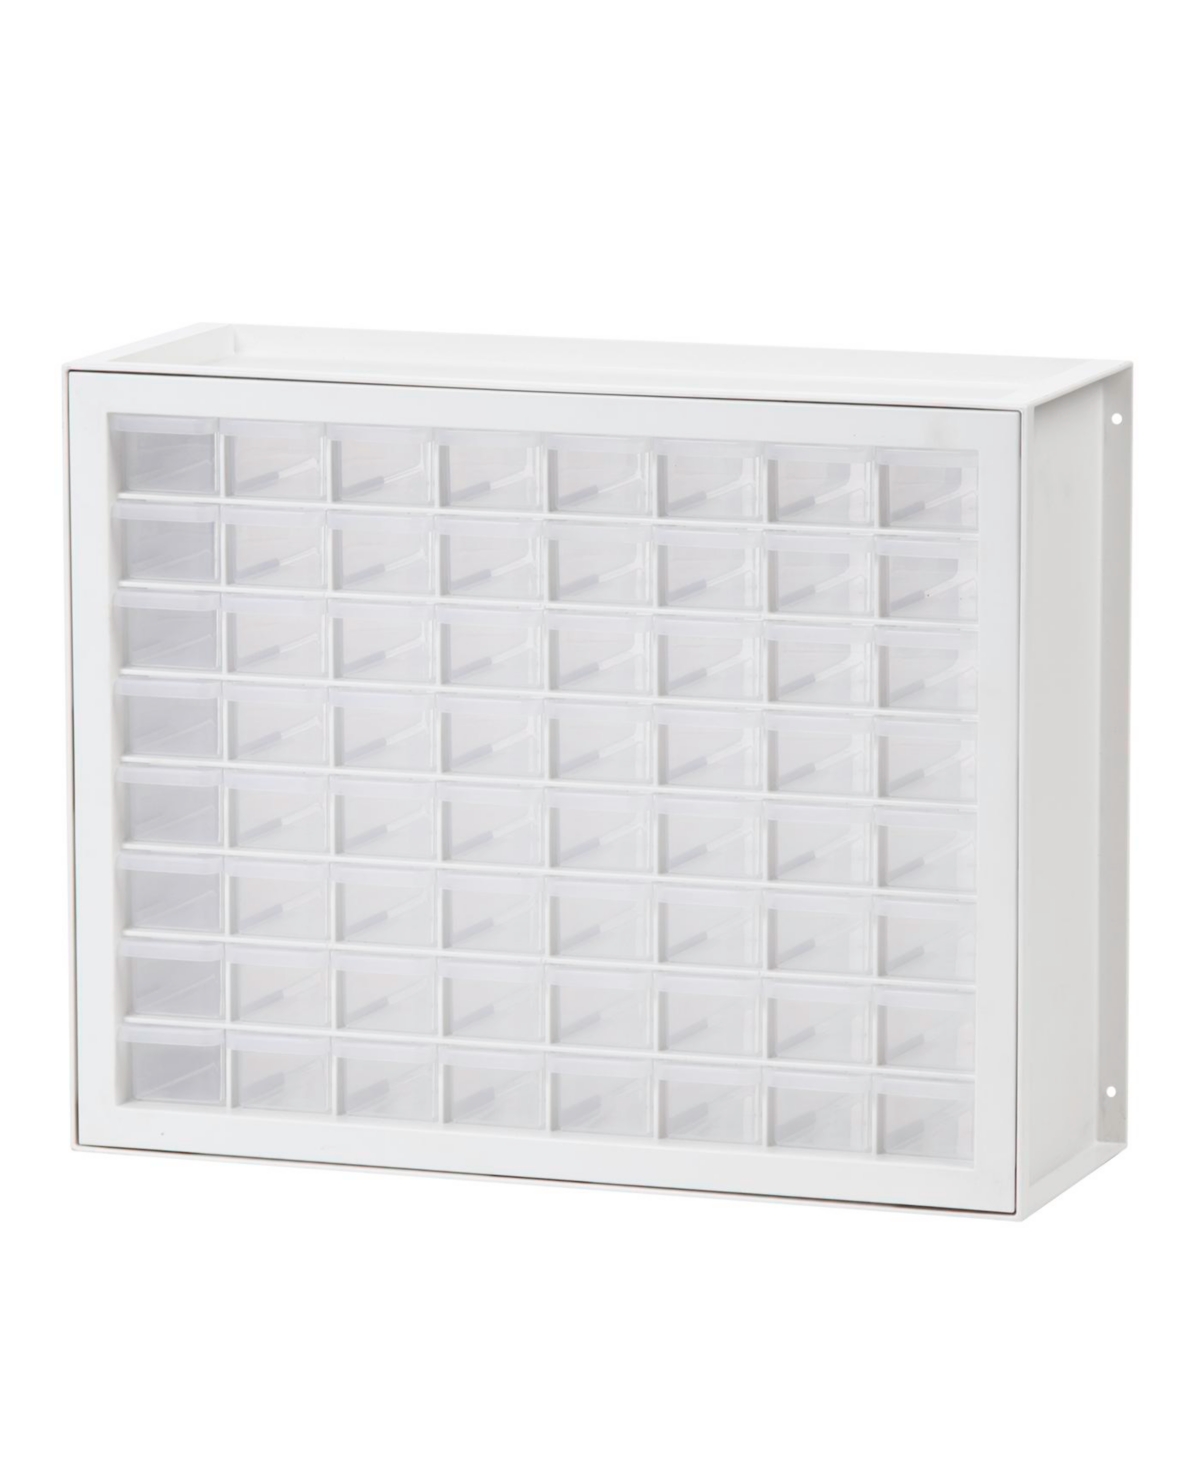 64 Drawer Sewing and Craft Parts Cabinet, White - White